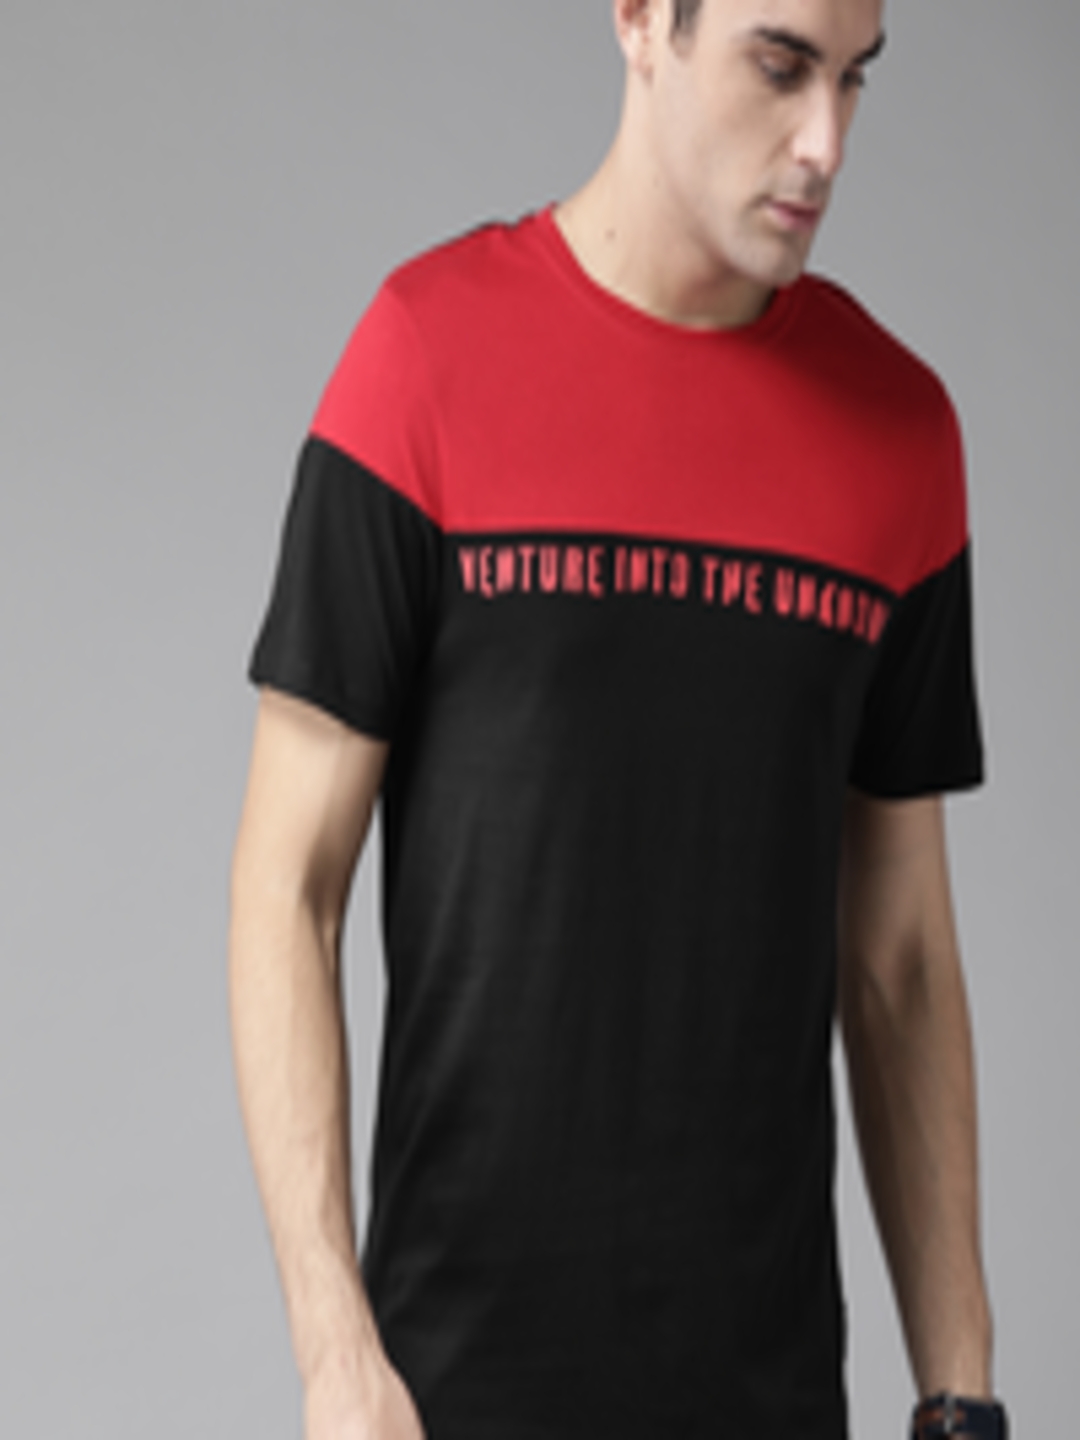 Buy The Roadster Lifestyle Co Men Black & Red Colourblocked Round Neck ...